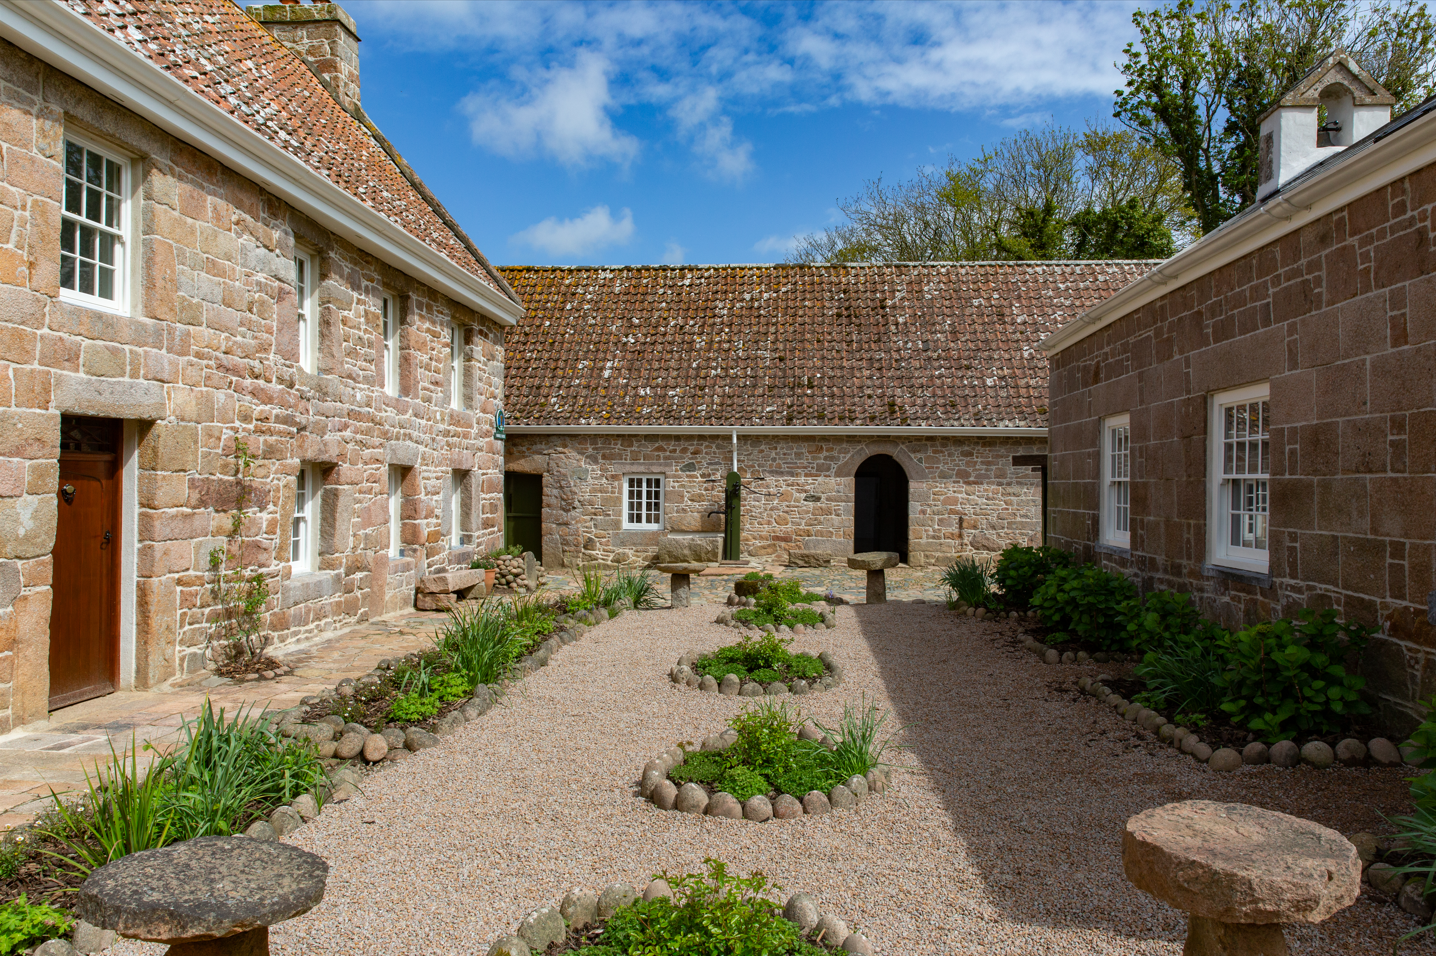 Courtyard area -The Farmhouse is on the left and the Chapel on the right